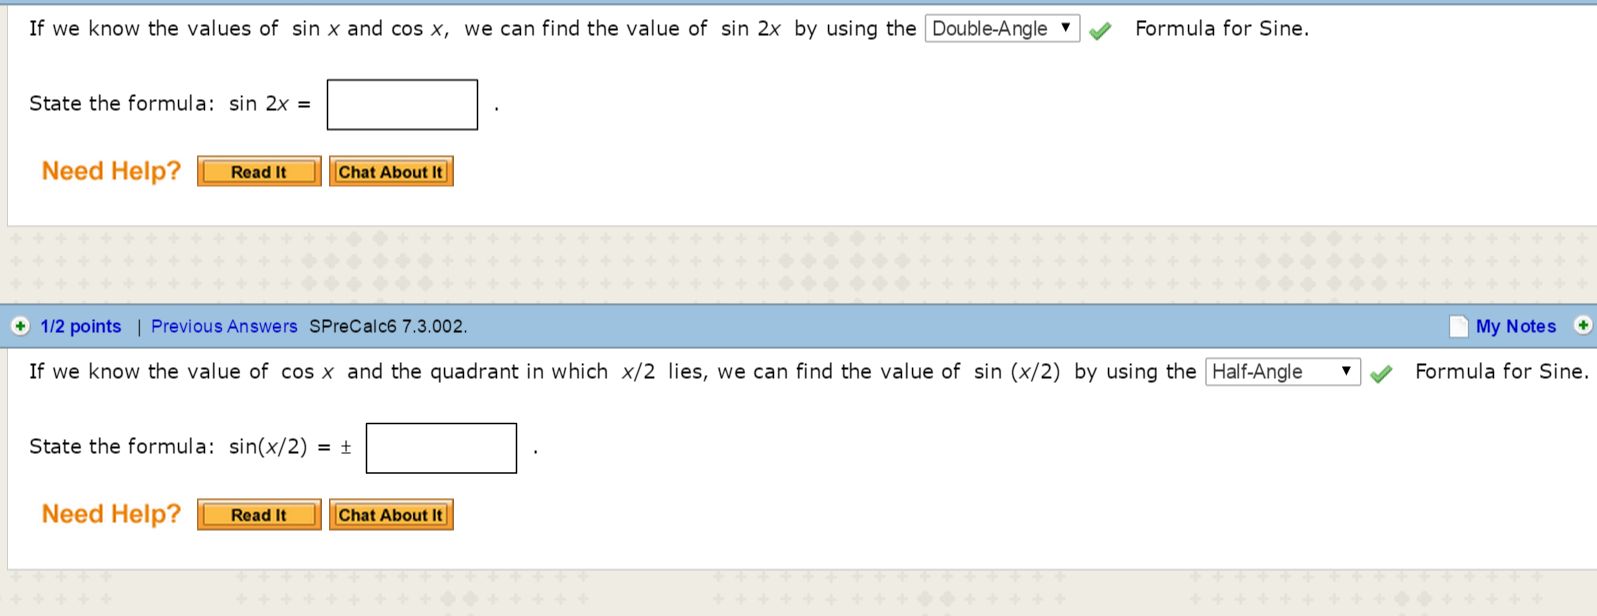 Find Sin 2x Cos 2x And Tan 2x From The Given Chegg Com